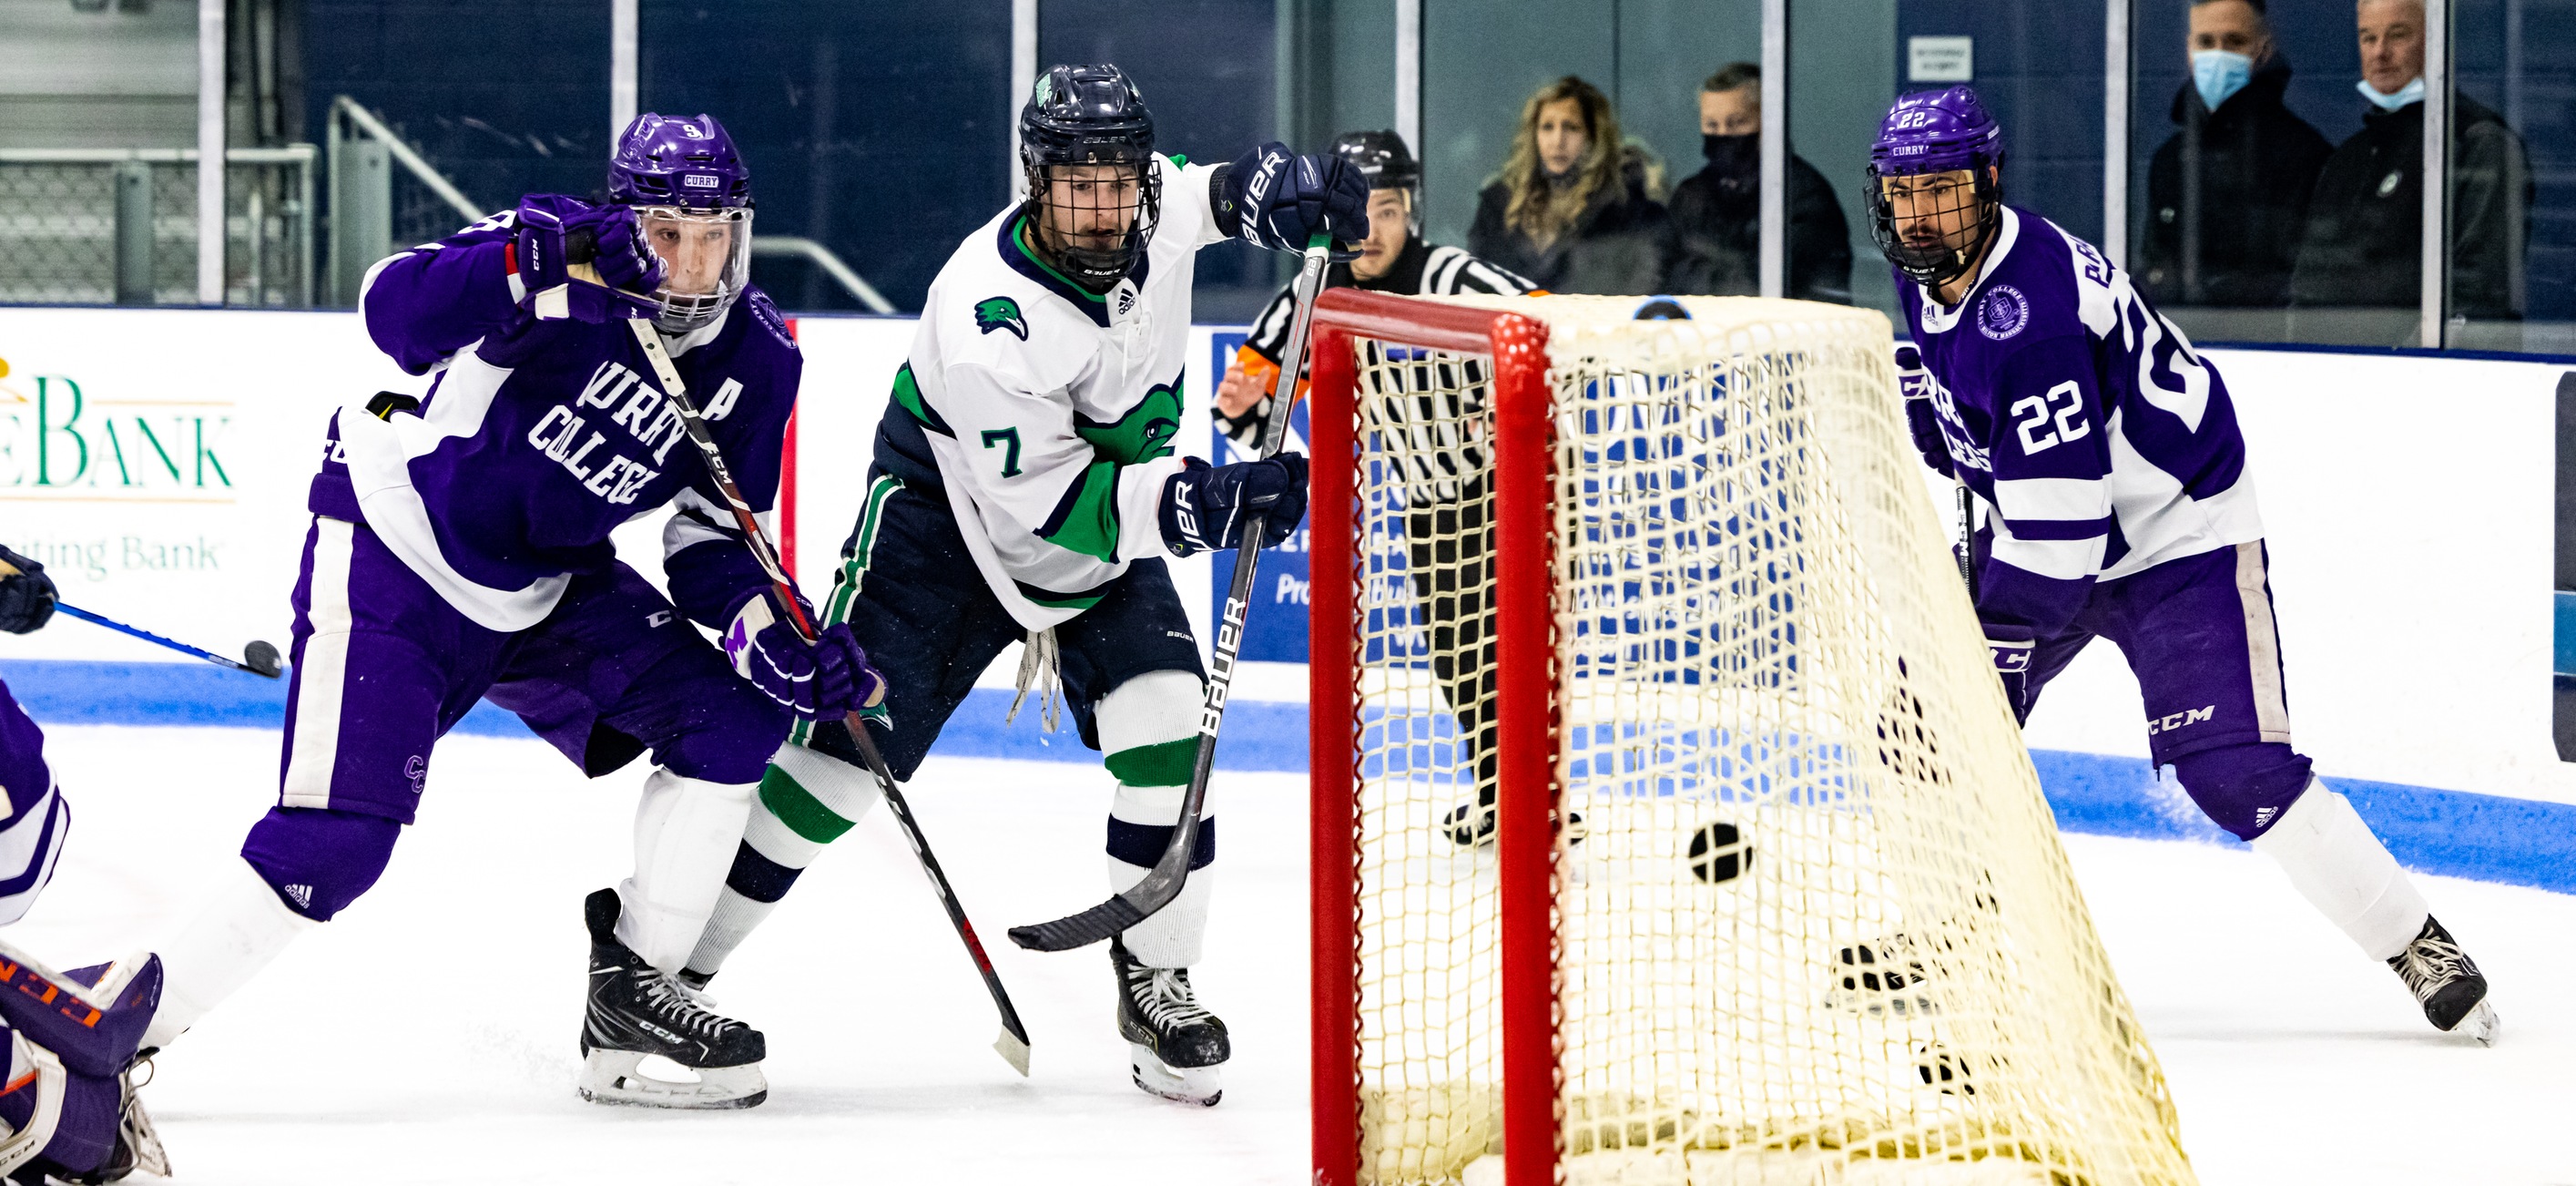 No. 8 Men's Ice Hockey Knocks Off Undefeated No. 13 Curry, 5-2